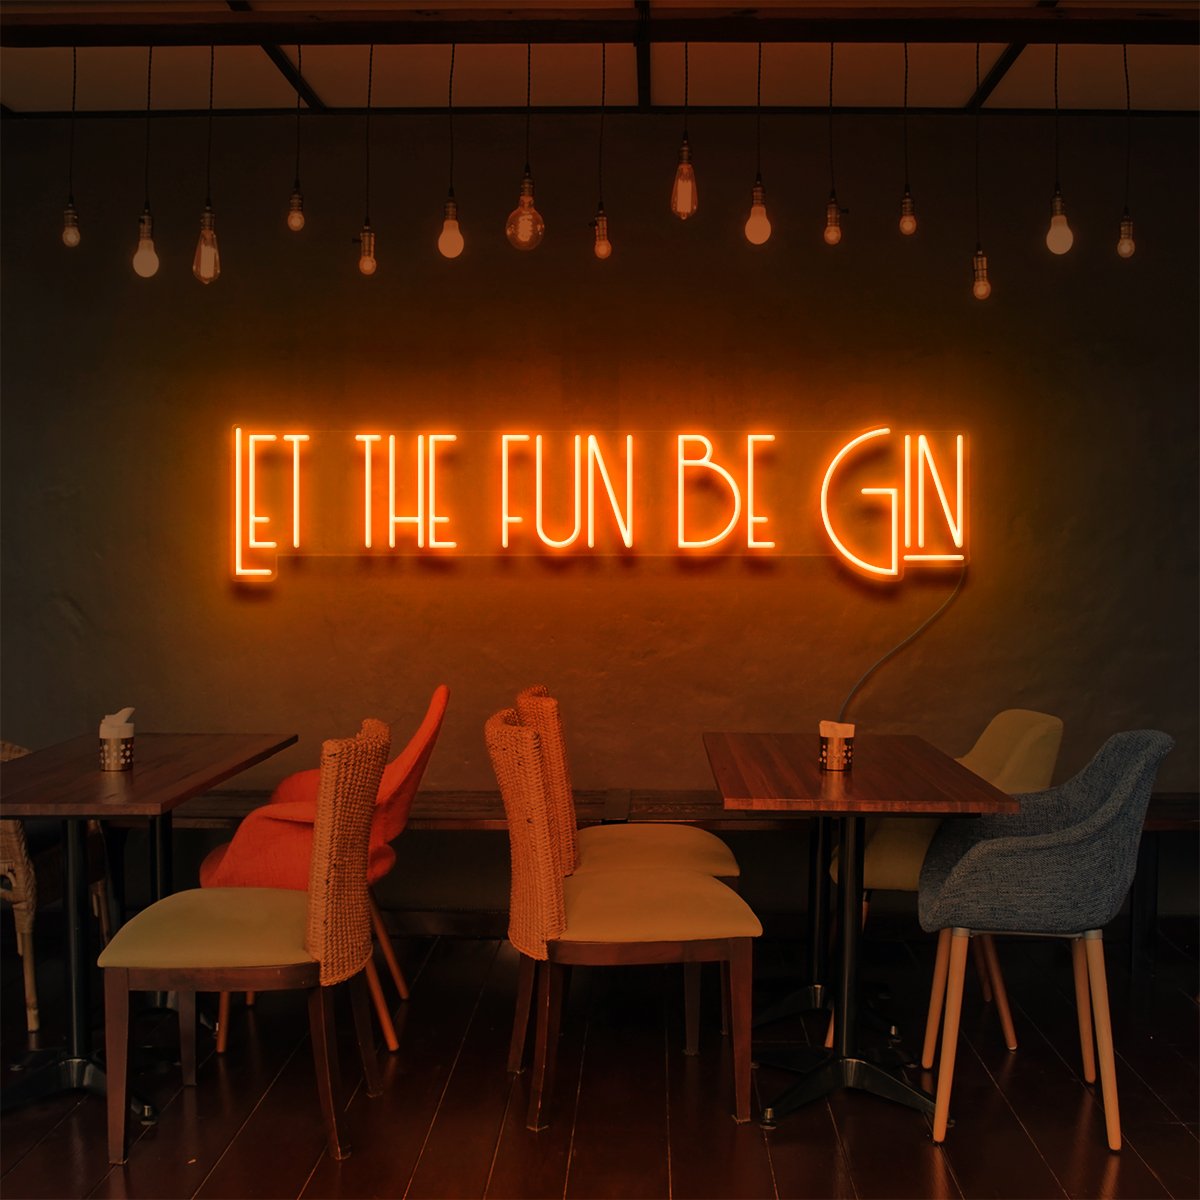 "Let The Fun Be Gin" Neon Sign for Bars & Restaurants 90cm (3ft) / Orange / LED Neon by Neon Icons